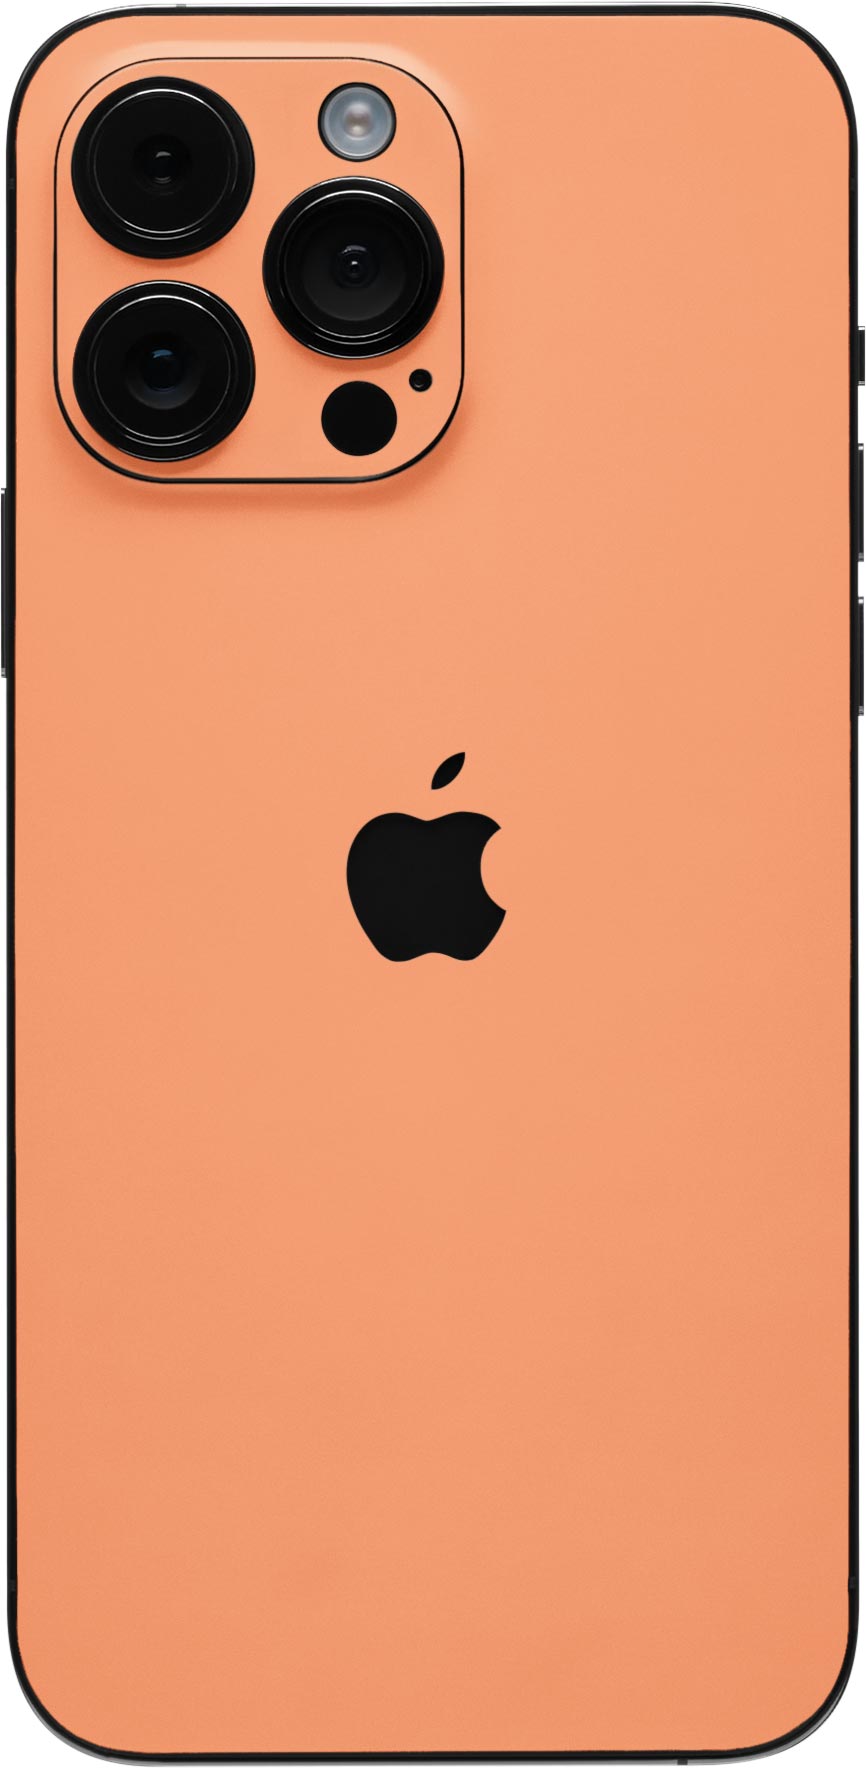 iPhone 14 Pro Max Skins, Wraps & Covers » dbrand